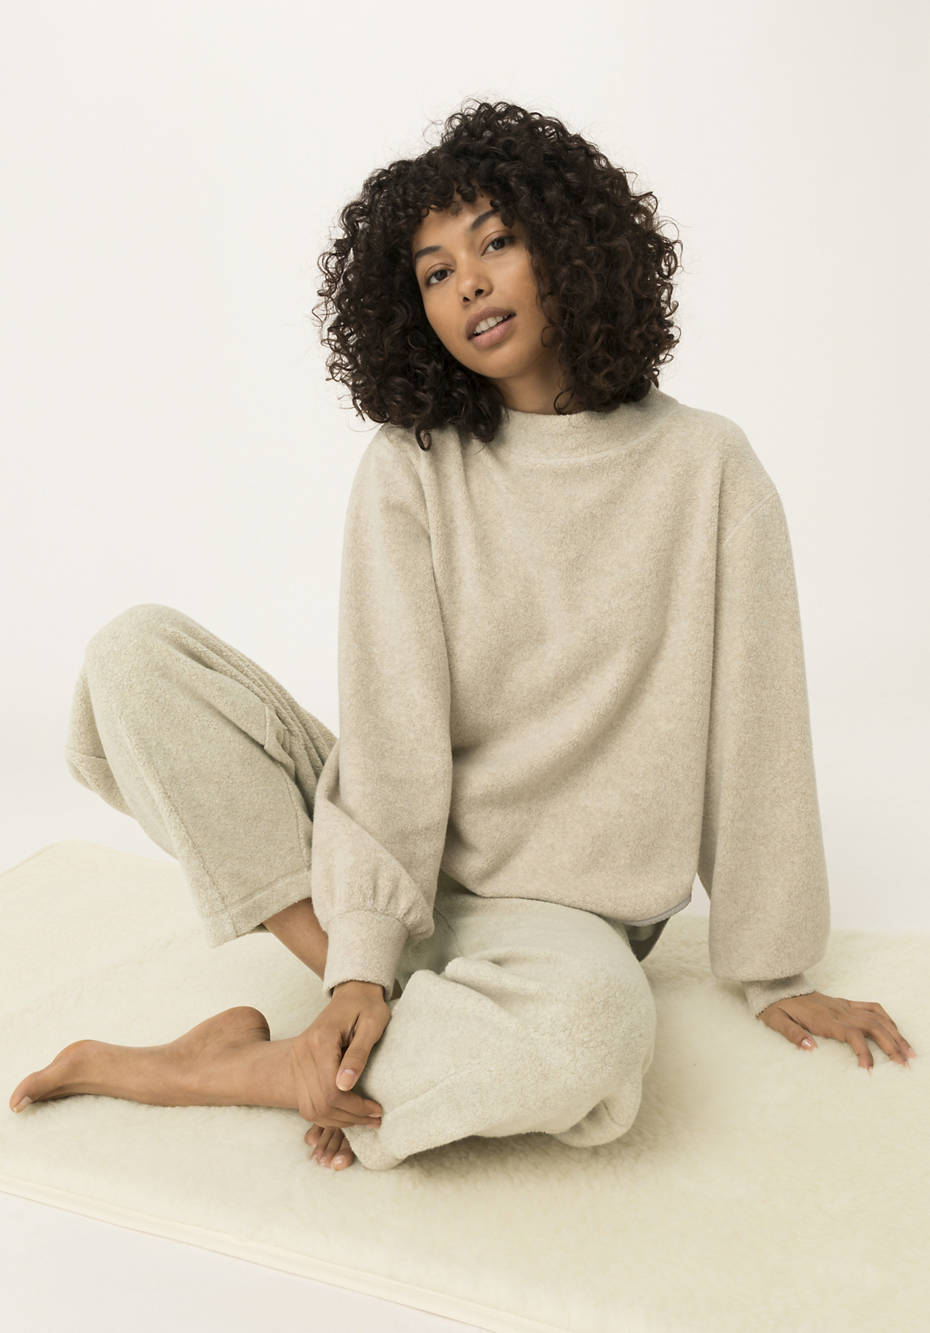 Fleece sweater made from pure organic cotton